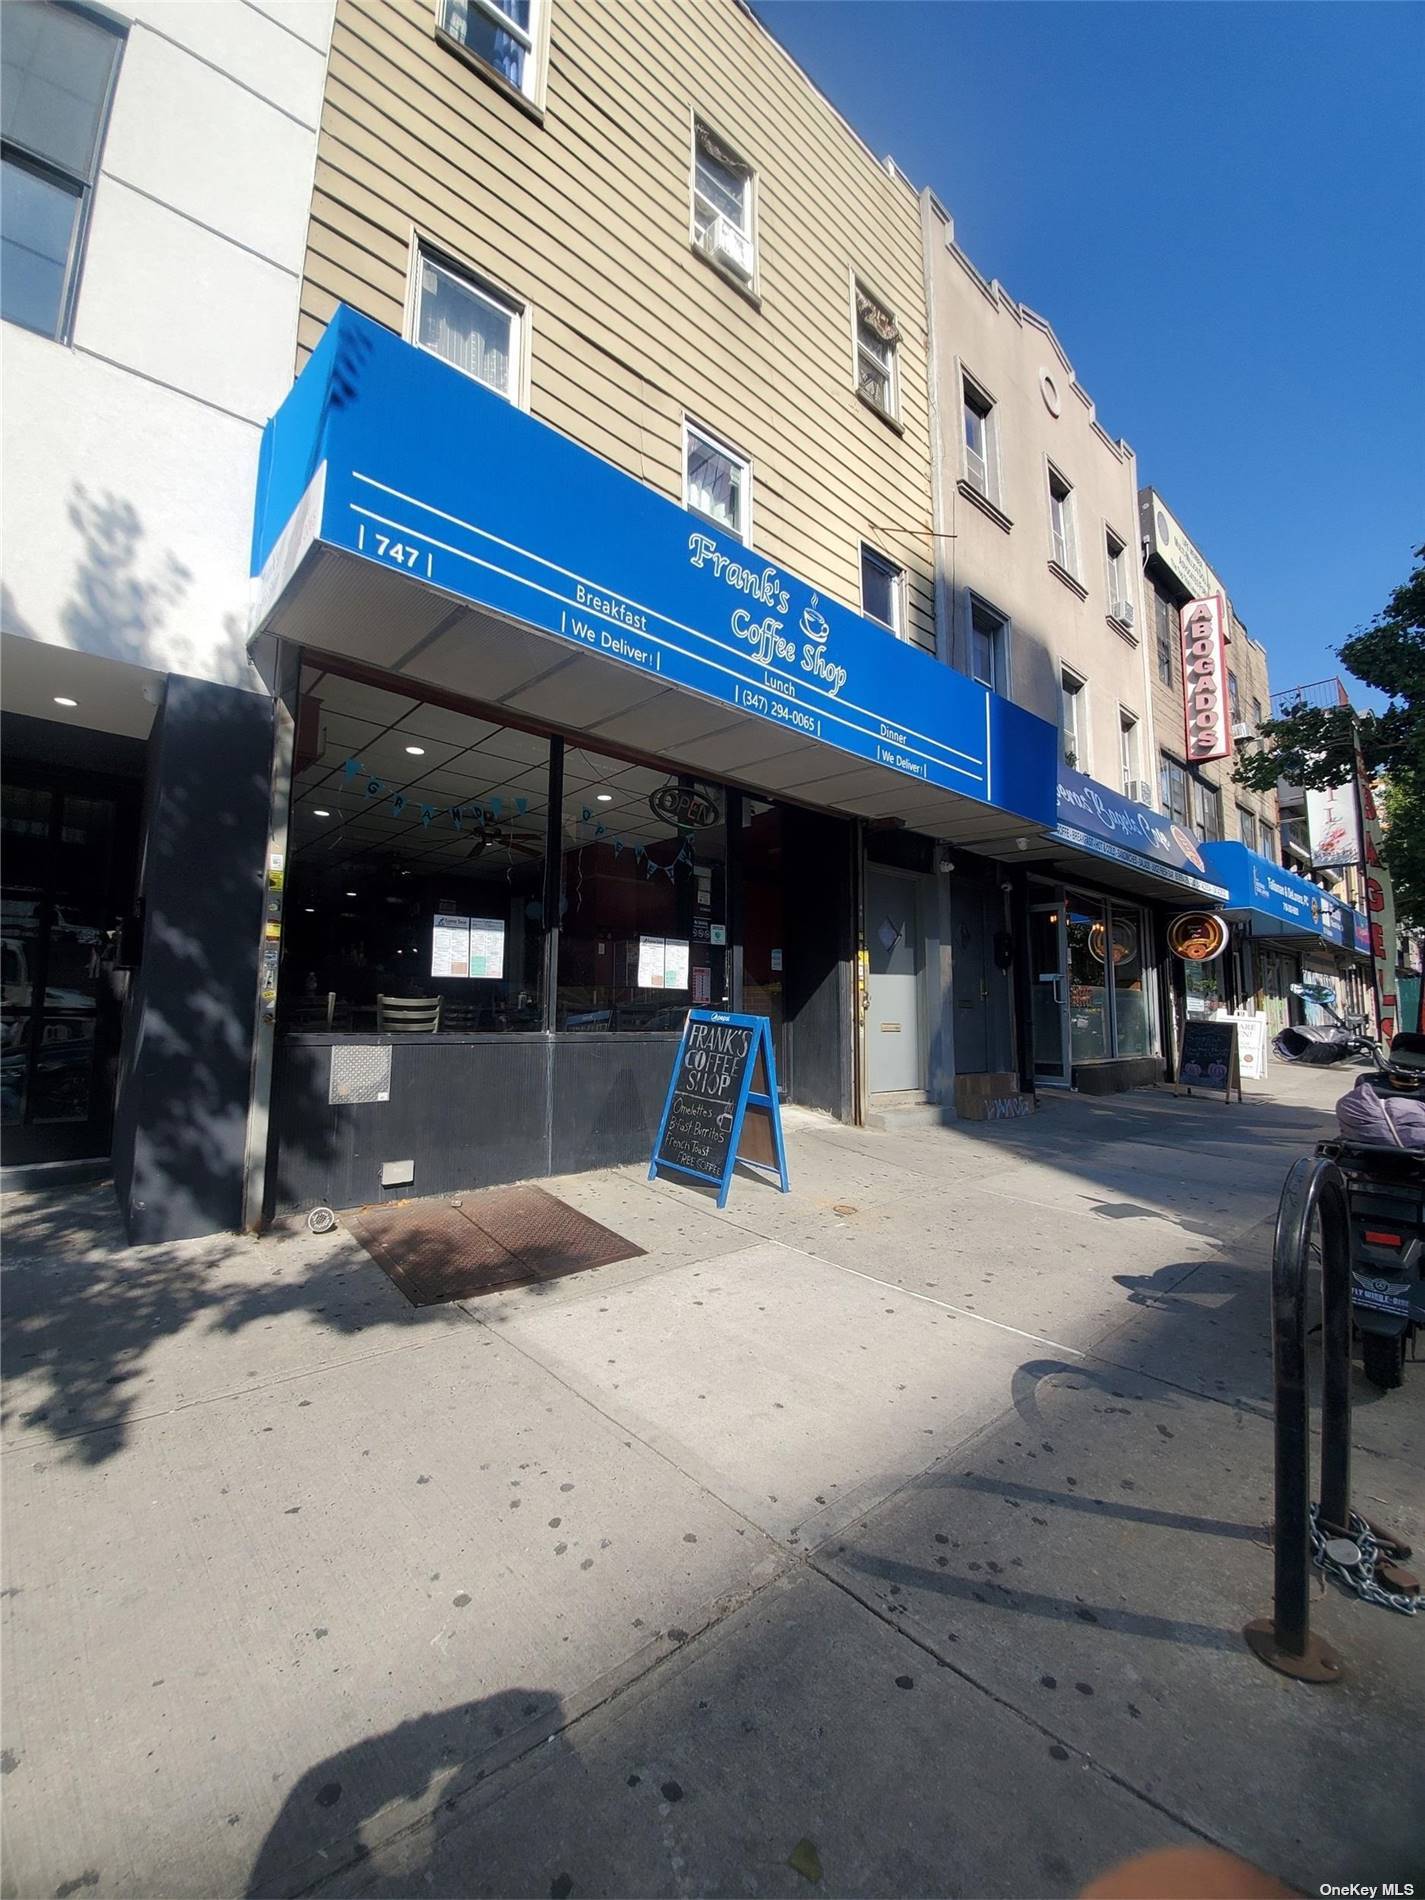 Restaurant Coffee Shop For Sale Bushwick, Brooklyn Price 100, 000 Square Footage 1, 500 Basement Rent 5, 000 per month assuming 5 year lease w 5 year option Ready to ...